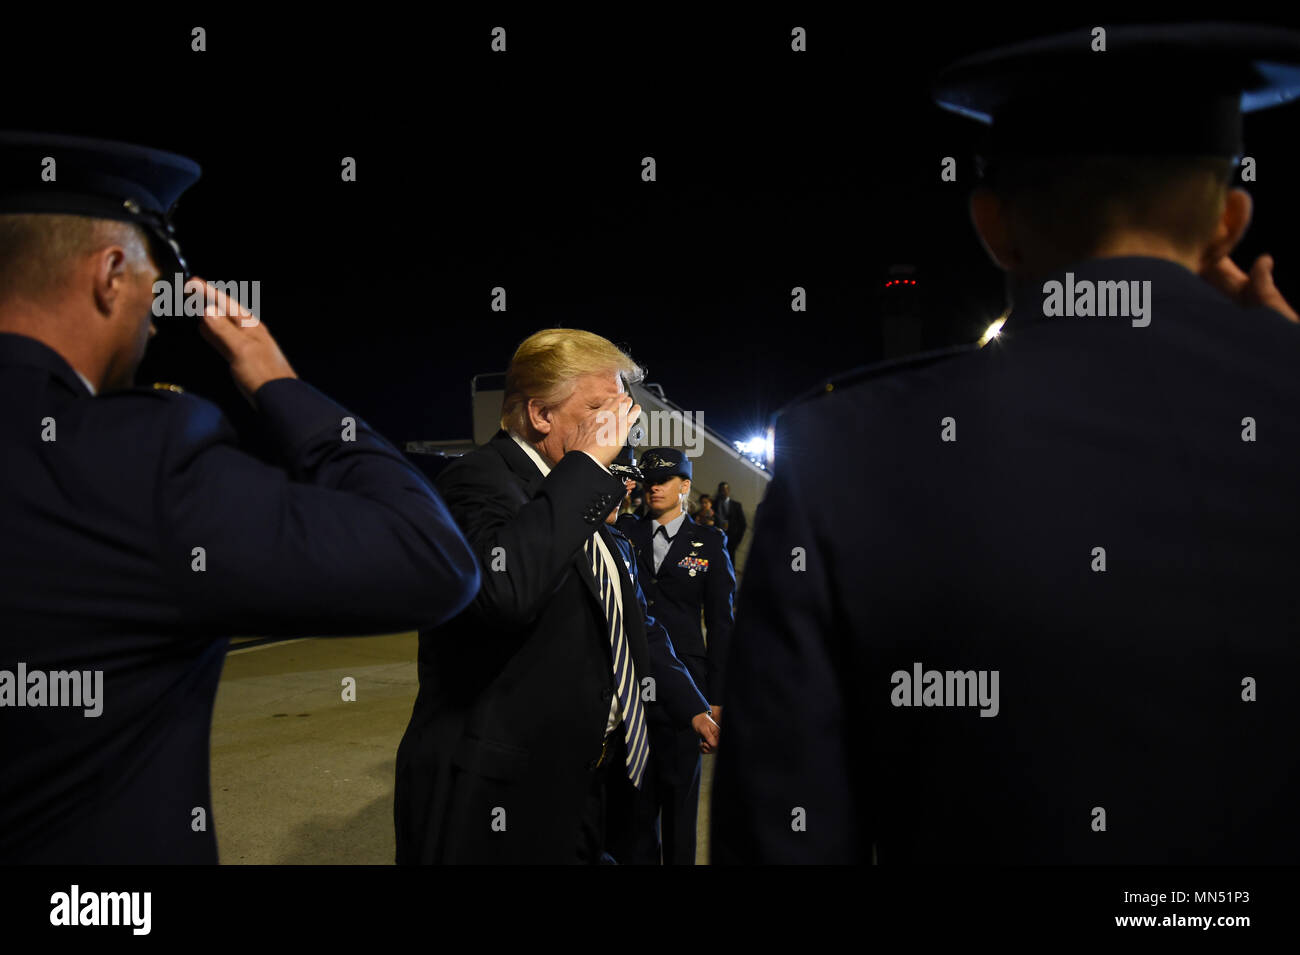 President of the United States Donald J. Trump salutes the official greeting party upon arriving at Joint Base Andrews, Md., May 10, 2018 as he prepares to greet three Americans who were freed from North Korean prison on May 9, 2018. An 89th Airlift Wing C-40 high-priority personnel transport aircraft carried Kim Dong-chul, Tony Kim and Kim Hak-song from North Korea to Anchorage, Alaska where the plane refueled before arriving at JBA at 3 a.m. EST. The 89th AW executes special missions such as these on a routine basis while enabling national interests through global transportation for America' Stock Photo